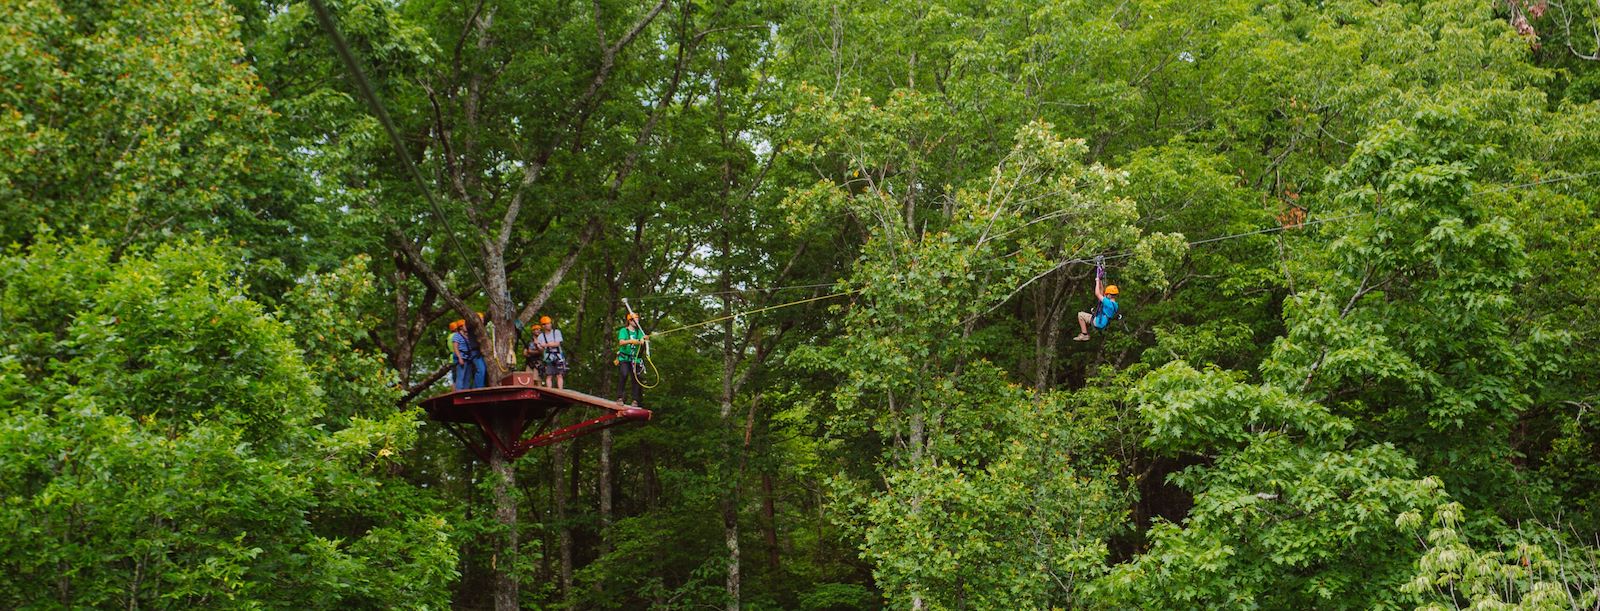 4 Benefits of the Braking System on Our Ziplines in the Smoky Mountains